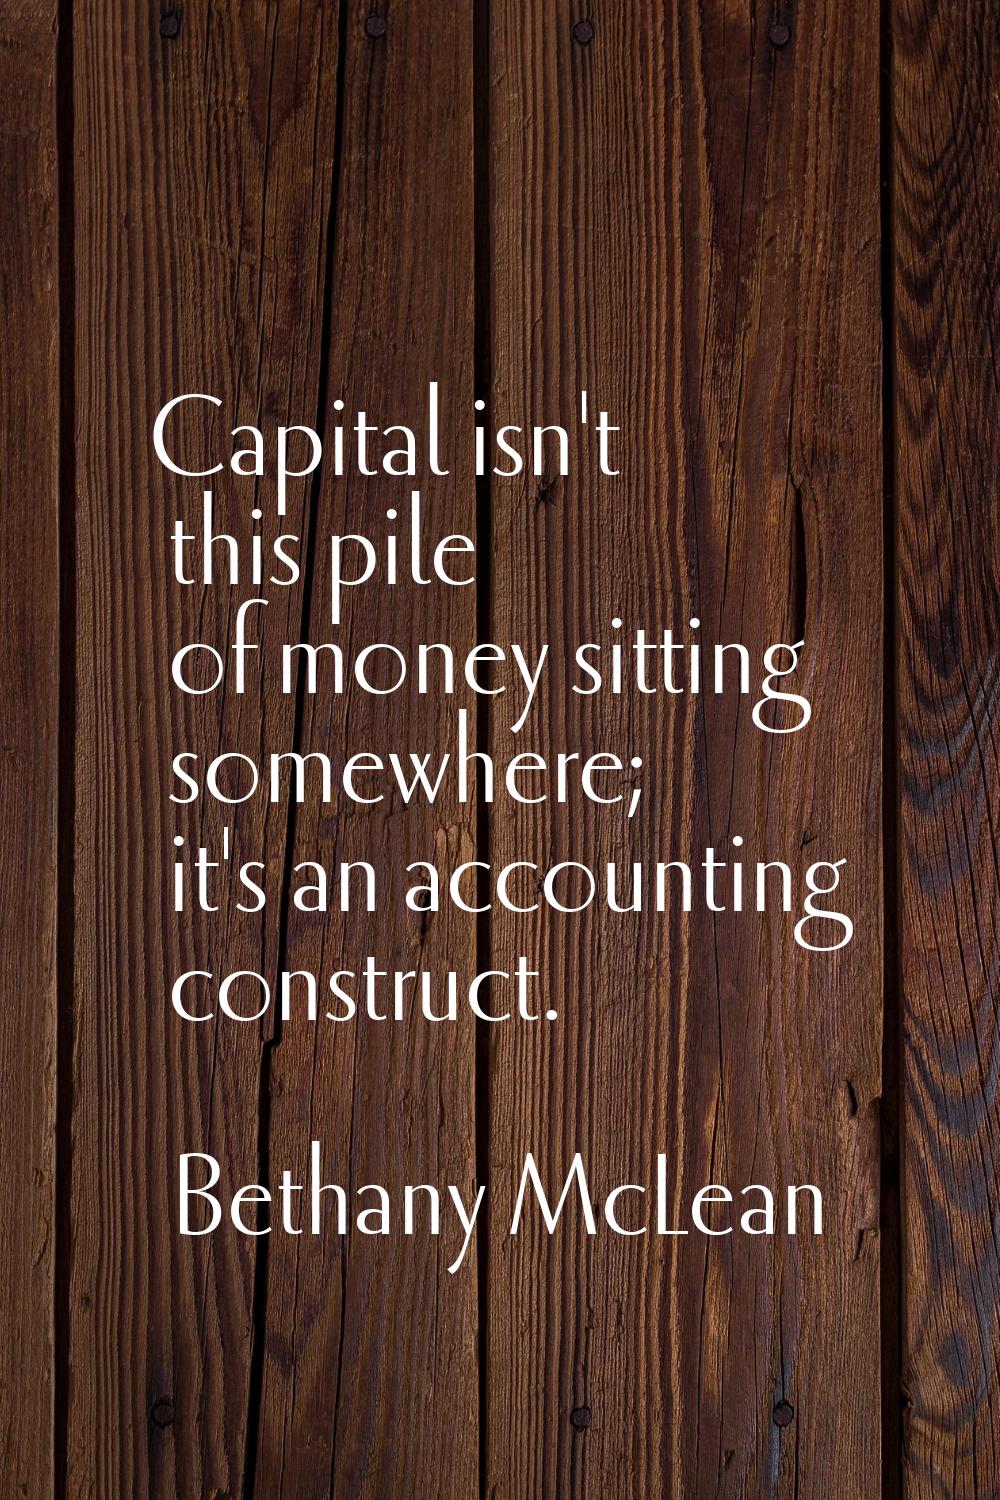 Capital isn't this pile of money sitting somewhere; it's an accounting construct.